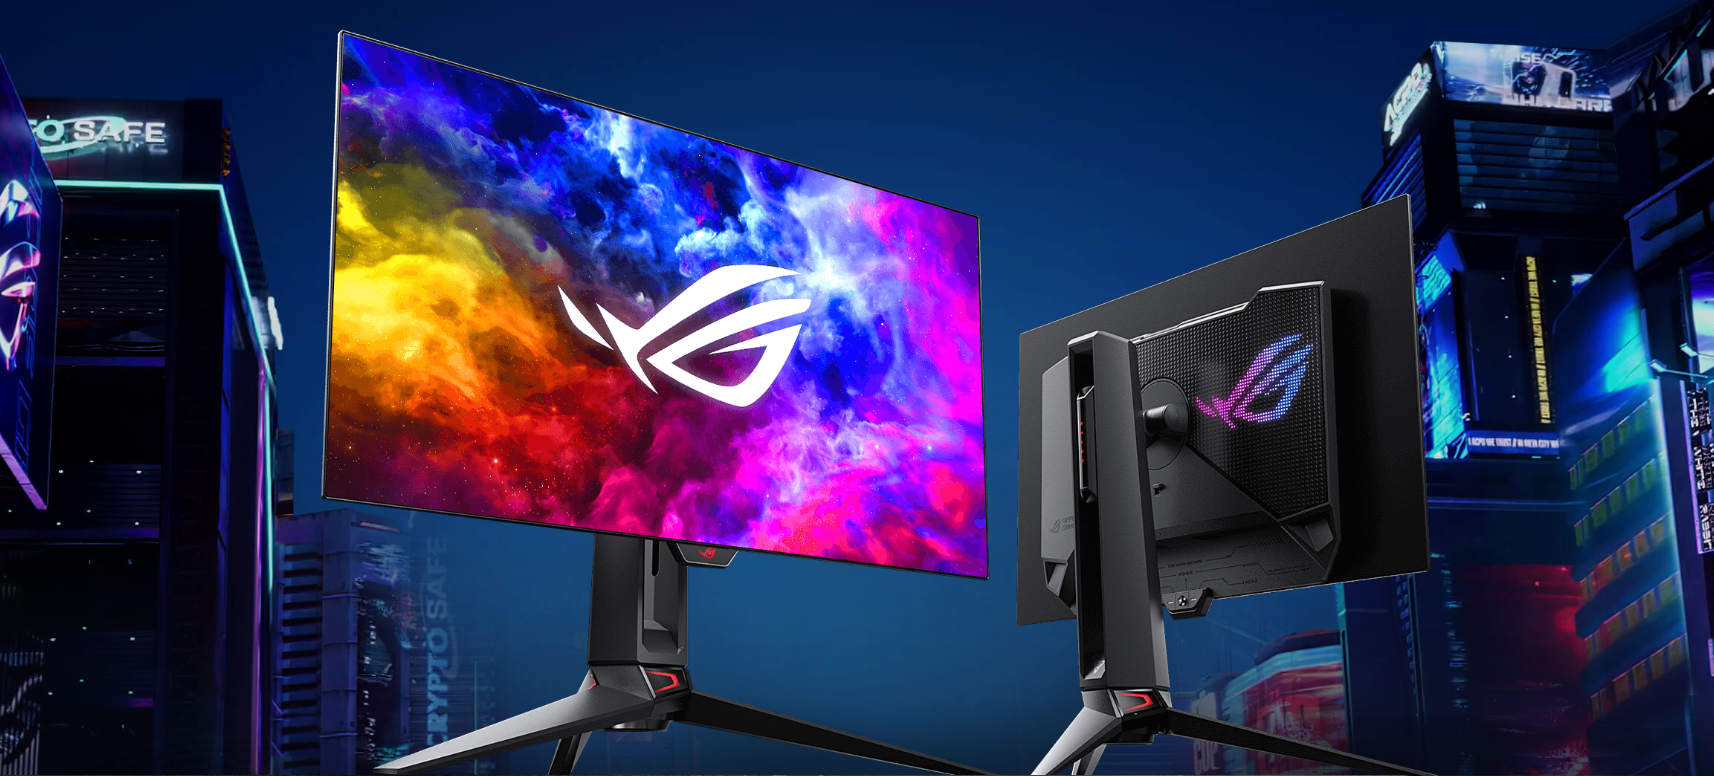 ASUS introduces ROG Swift 27" WQHD OLED WQHD gaming monitor with 240Hz frame rate